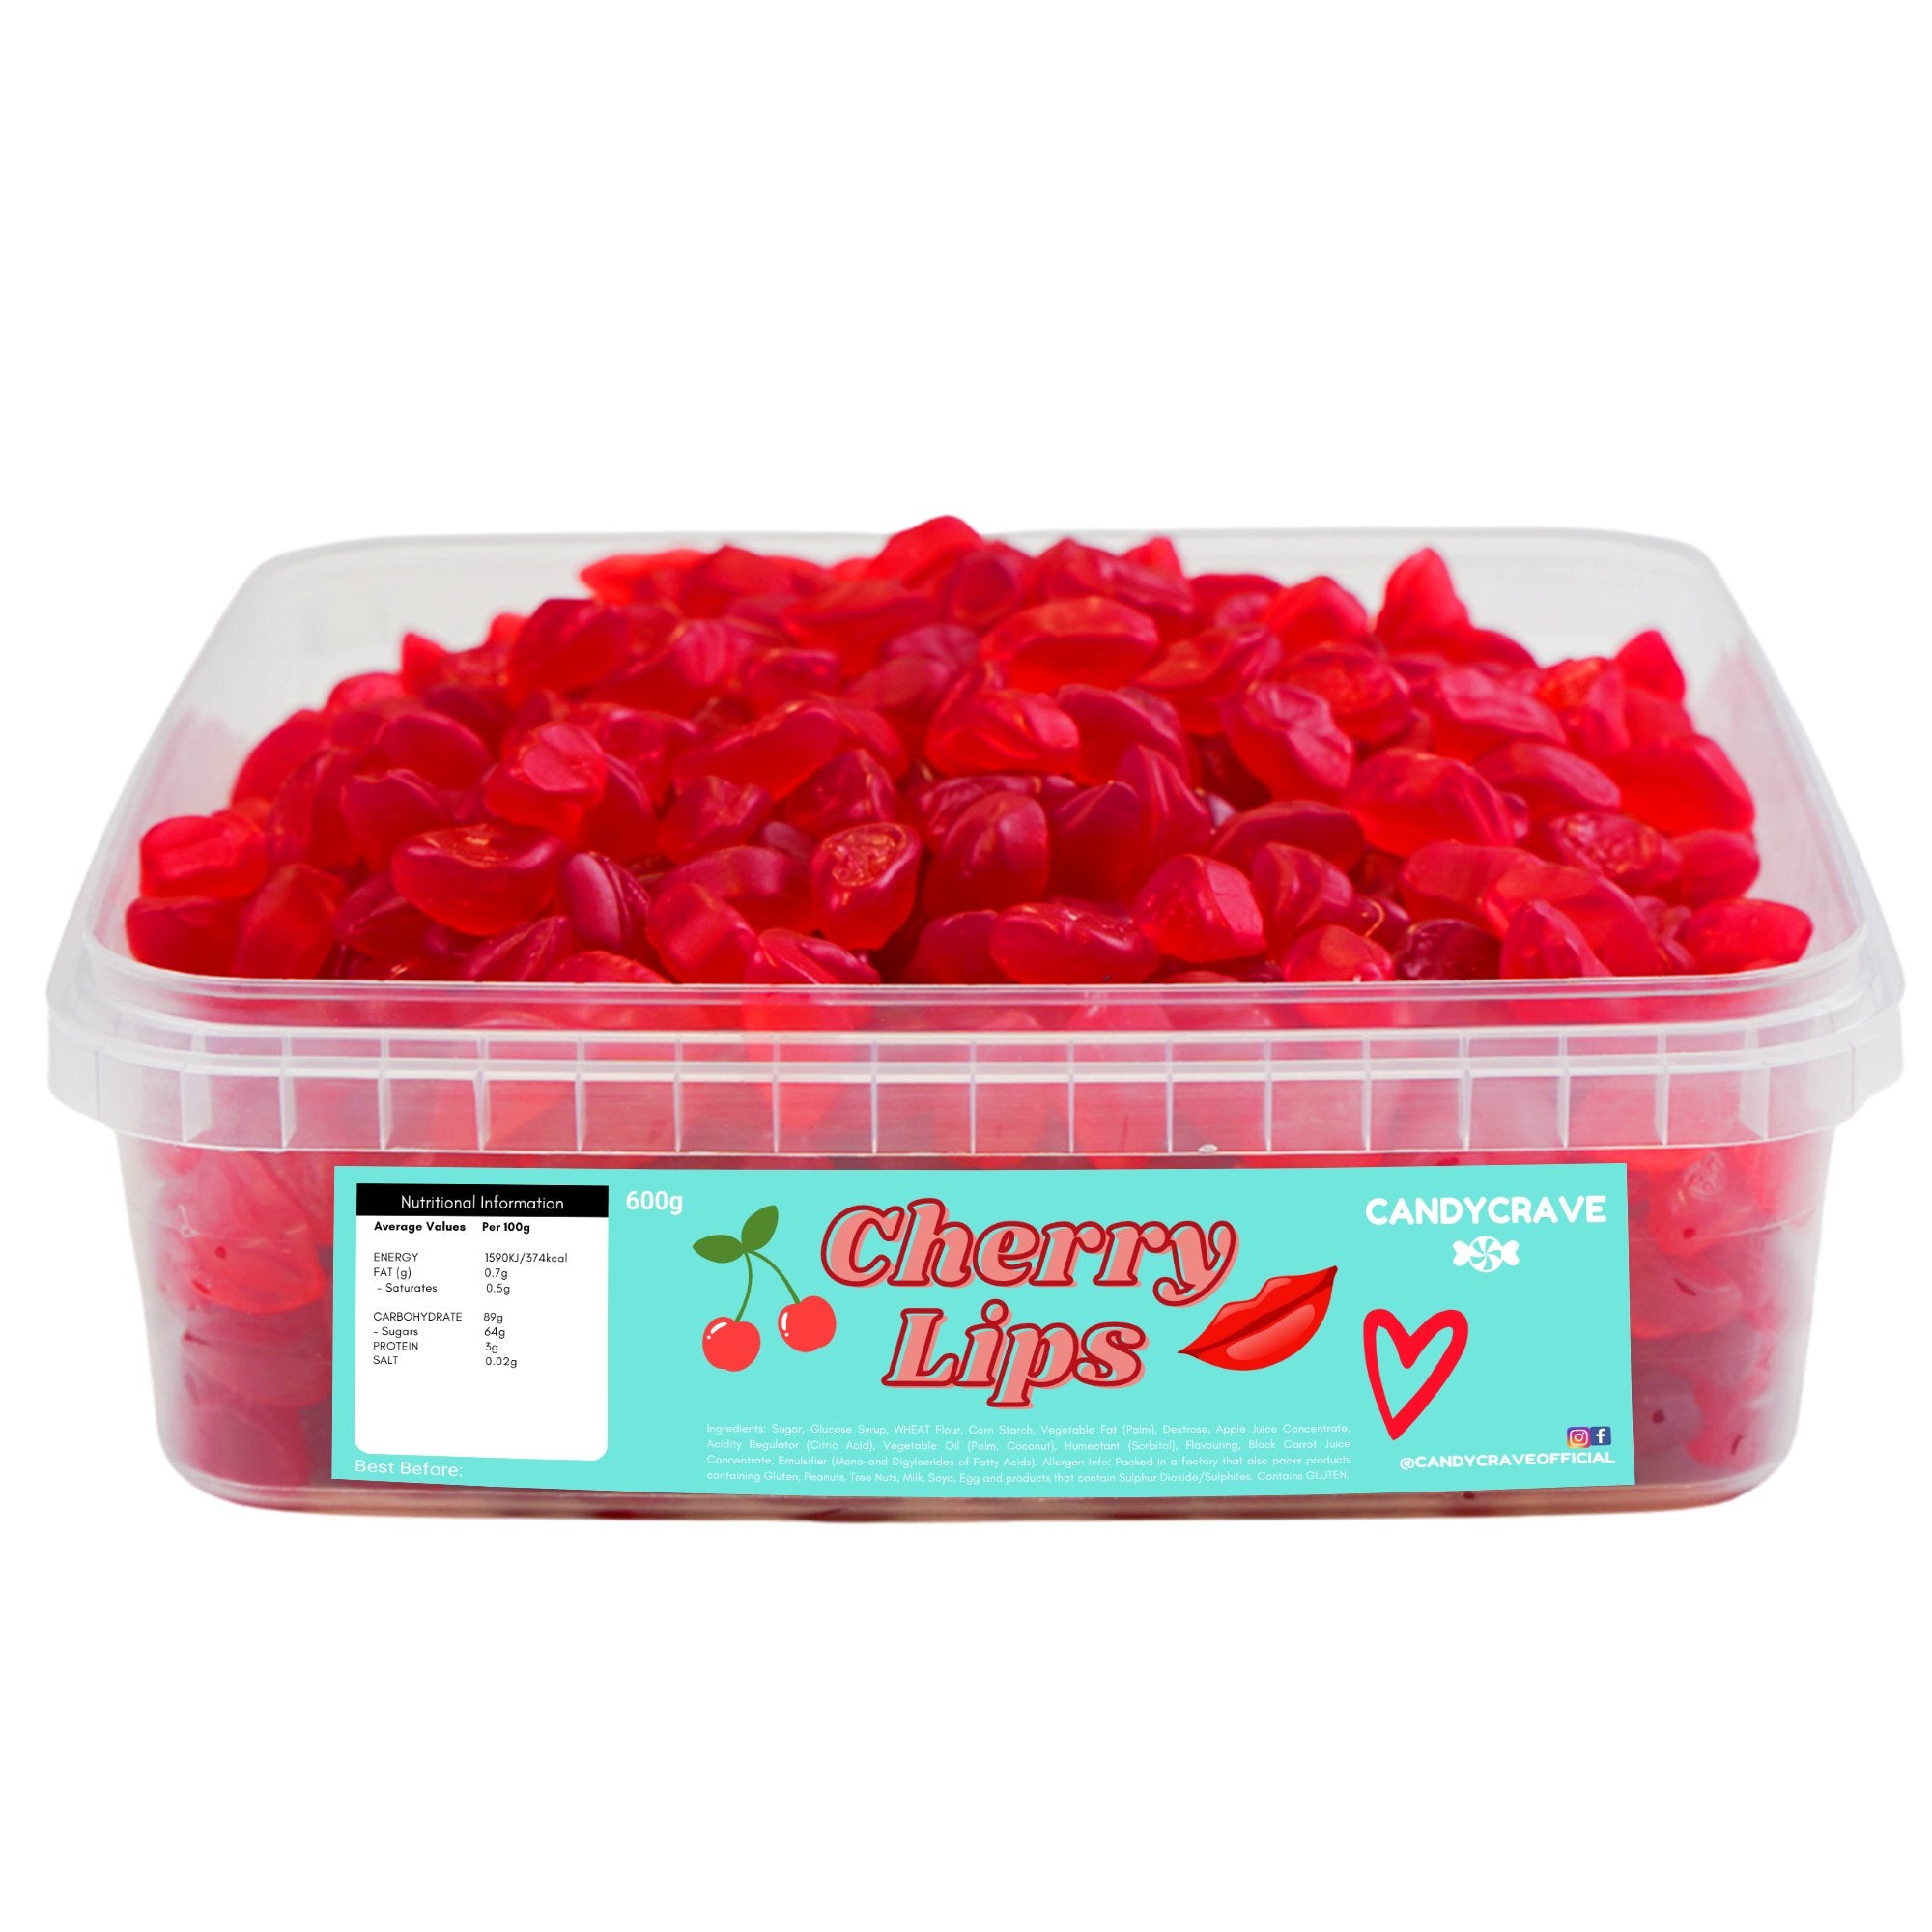 Candy Crave Cherry Lips Tub 600g - Jessica's Sweets